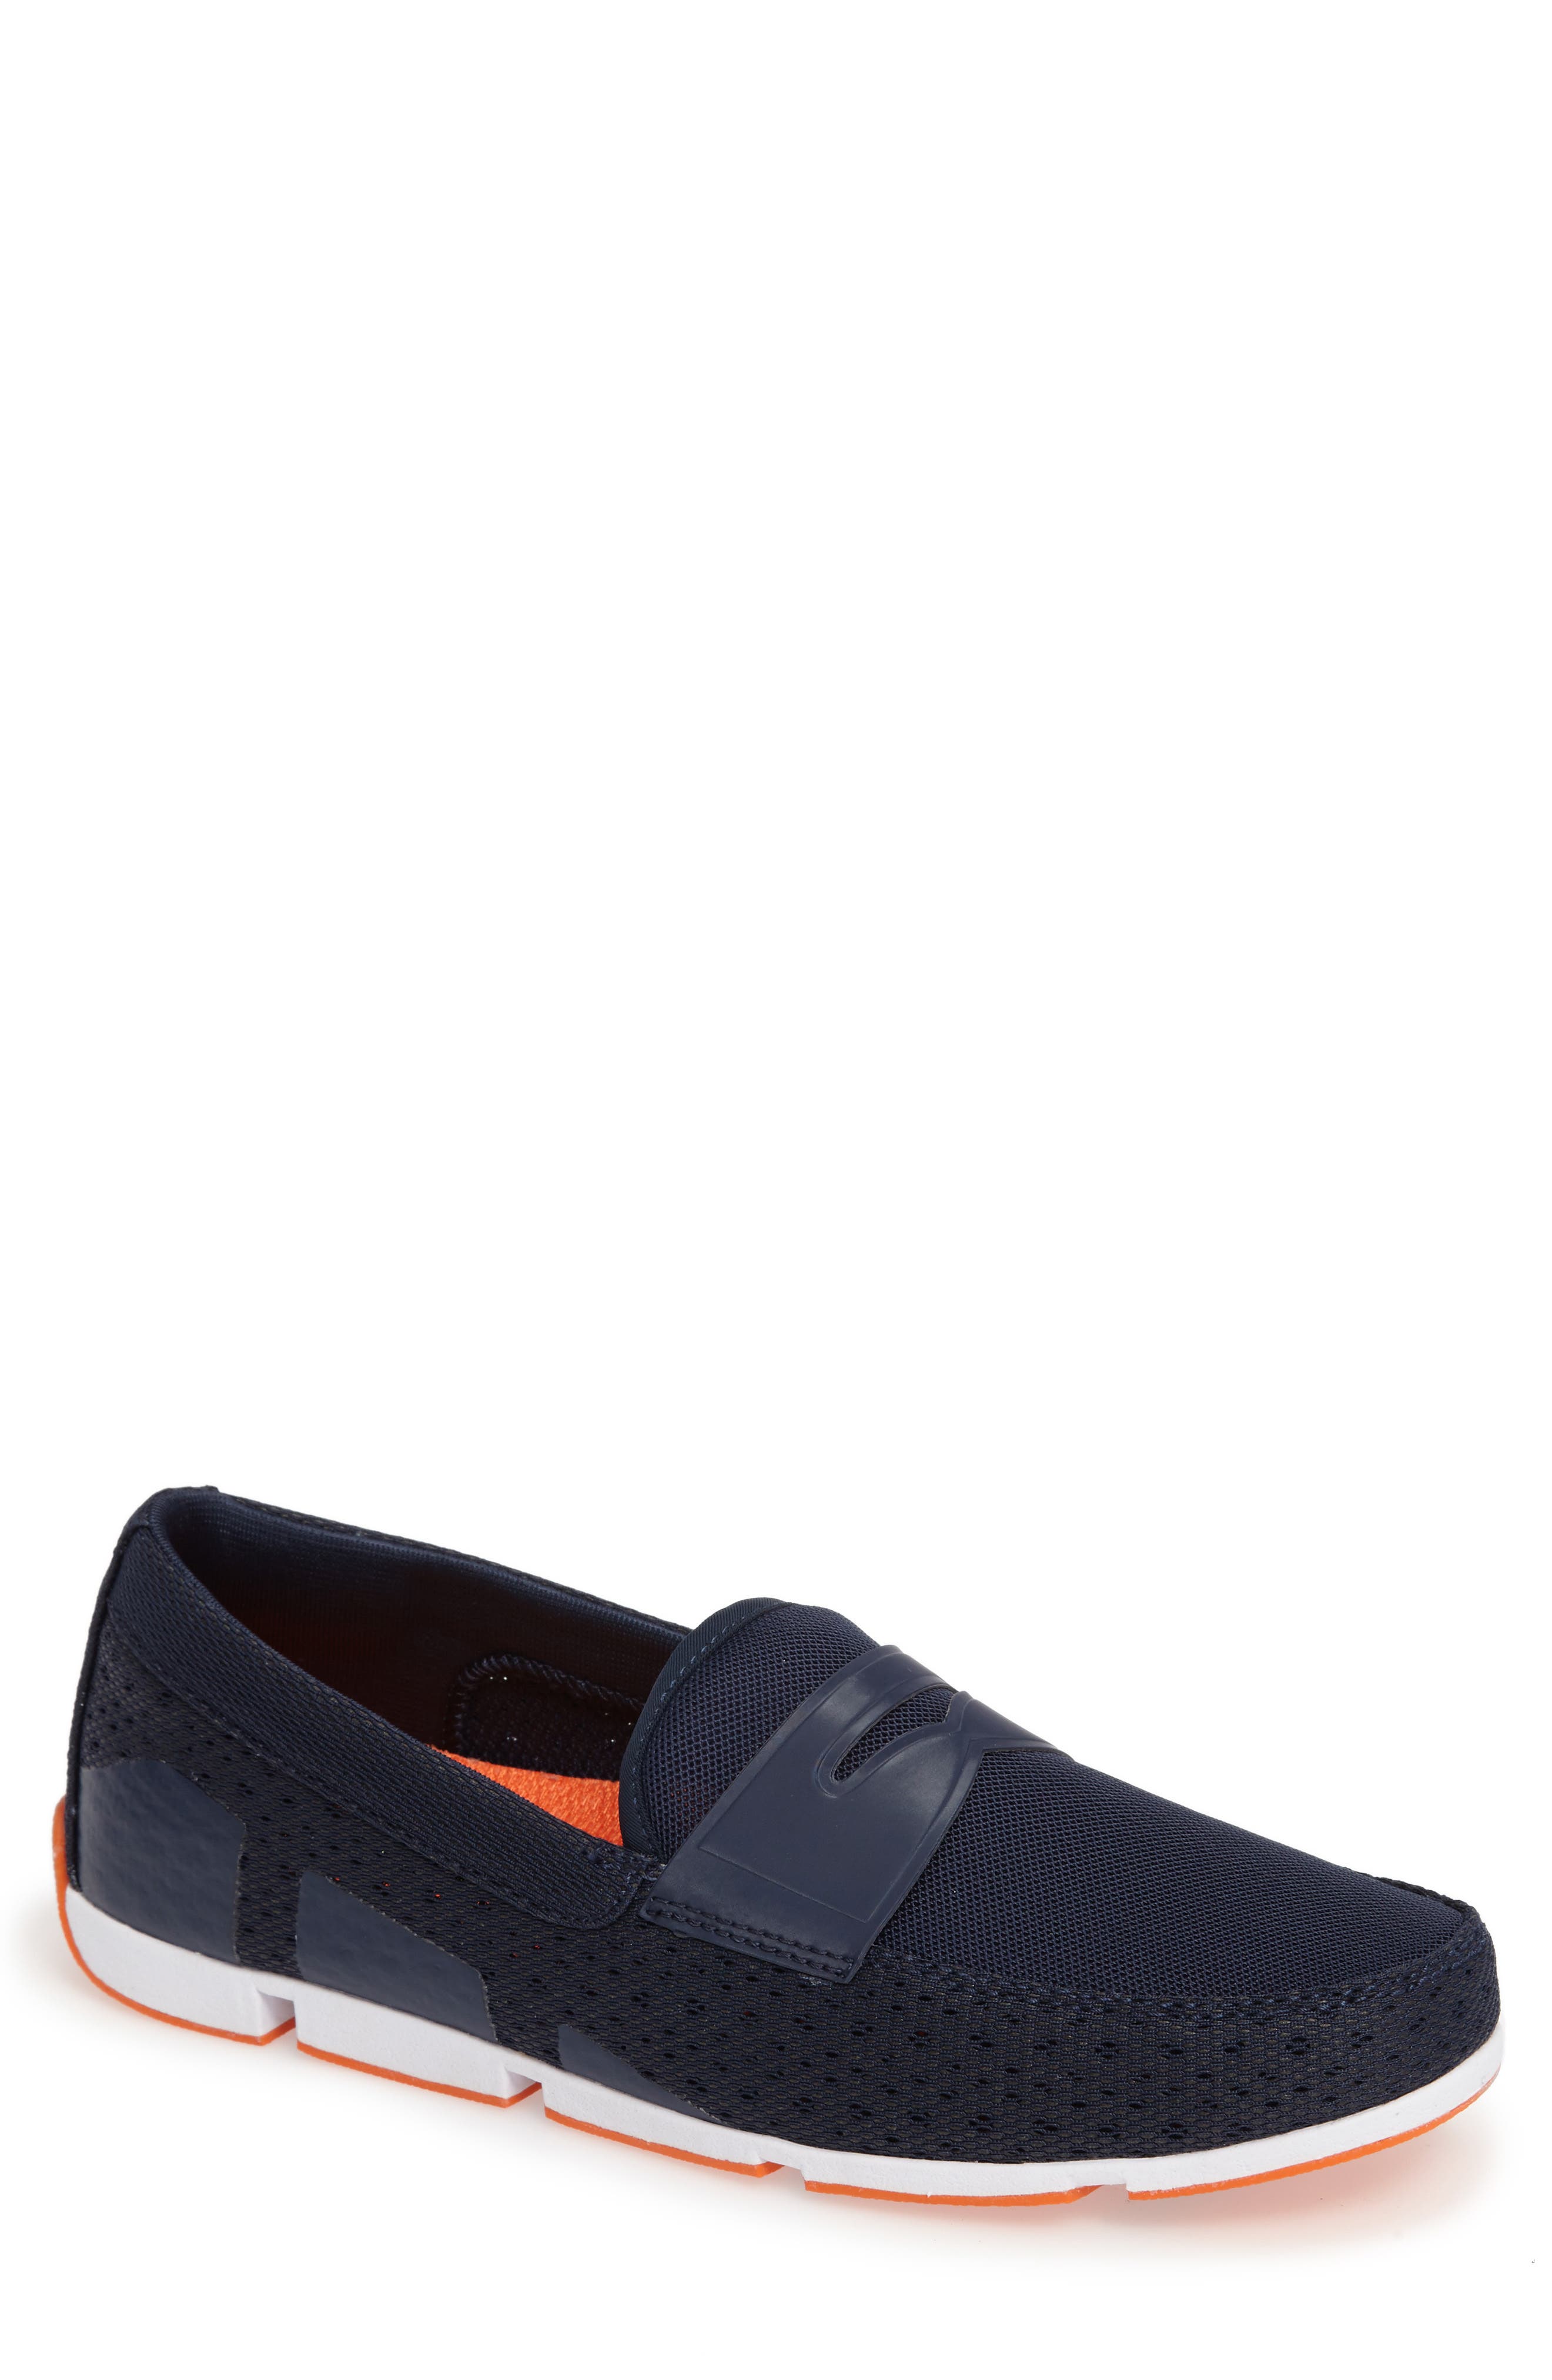 Swims | Breeze Penny Loafer | Nordstrom 